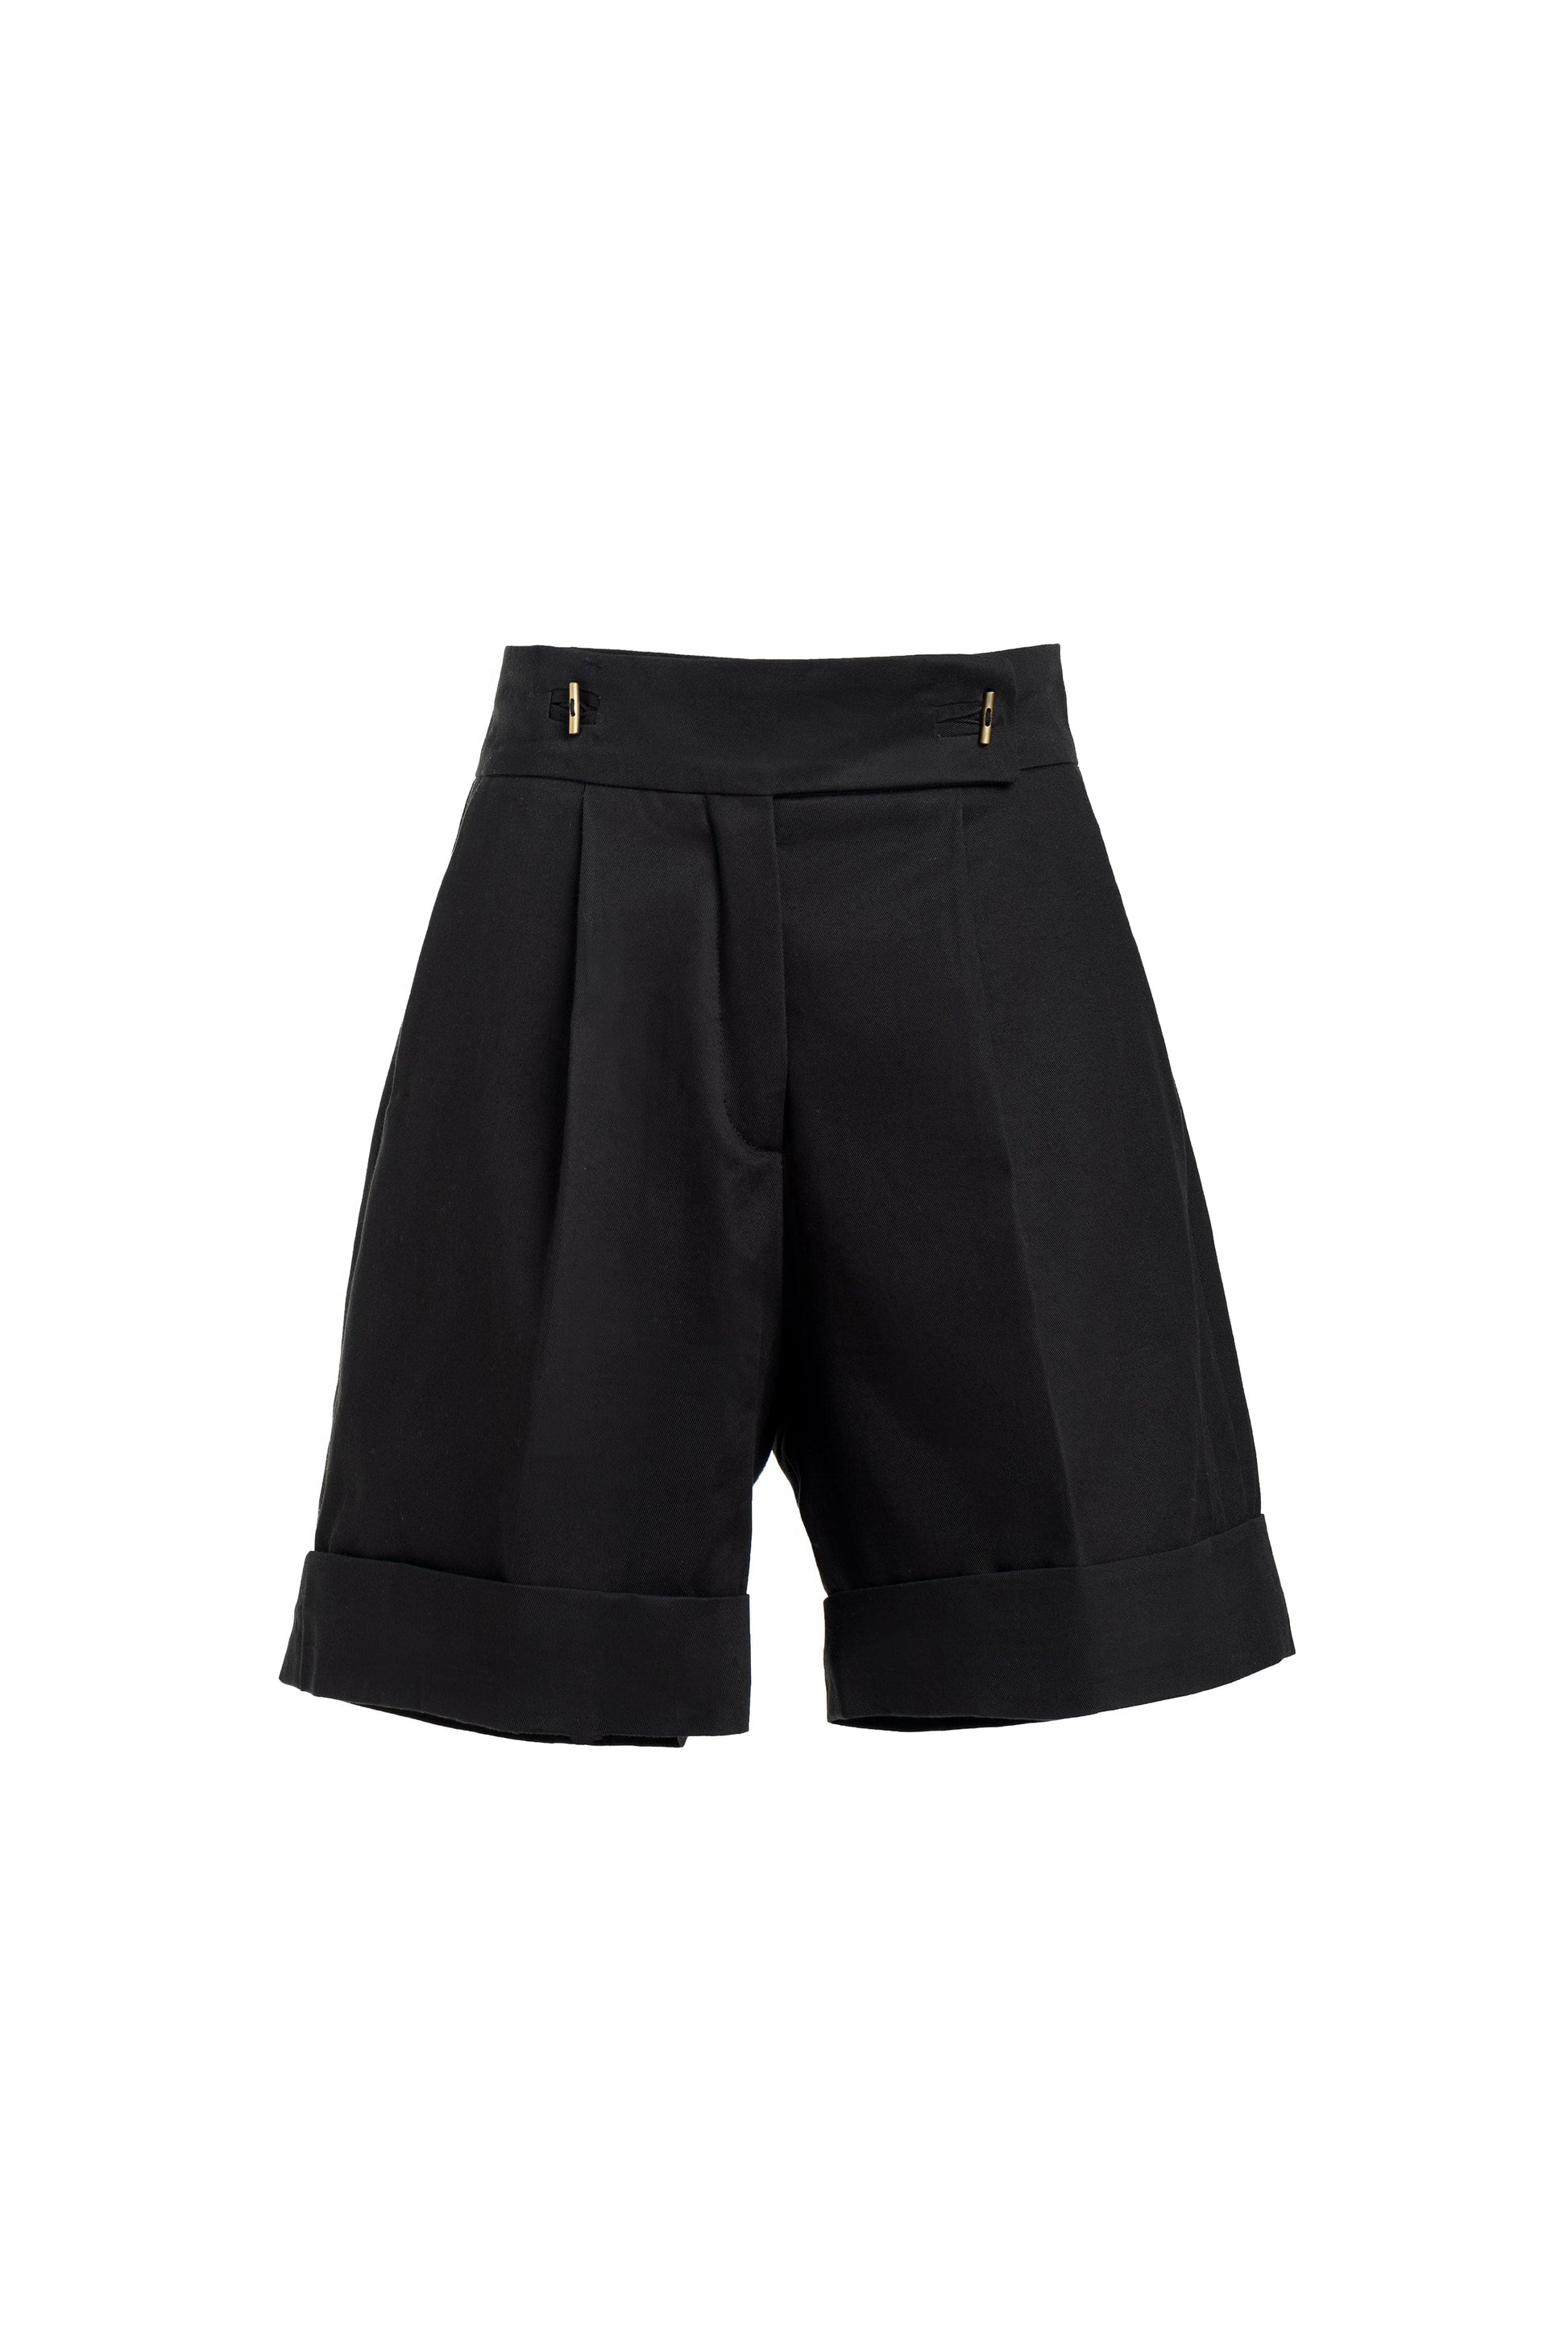 Fold Up Shorts - Atelier Forger